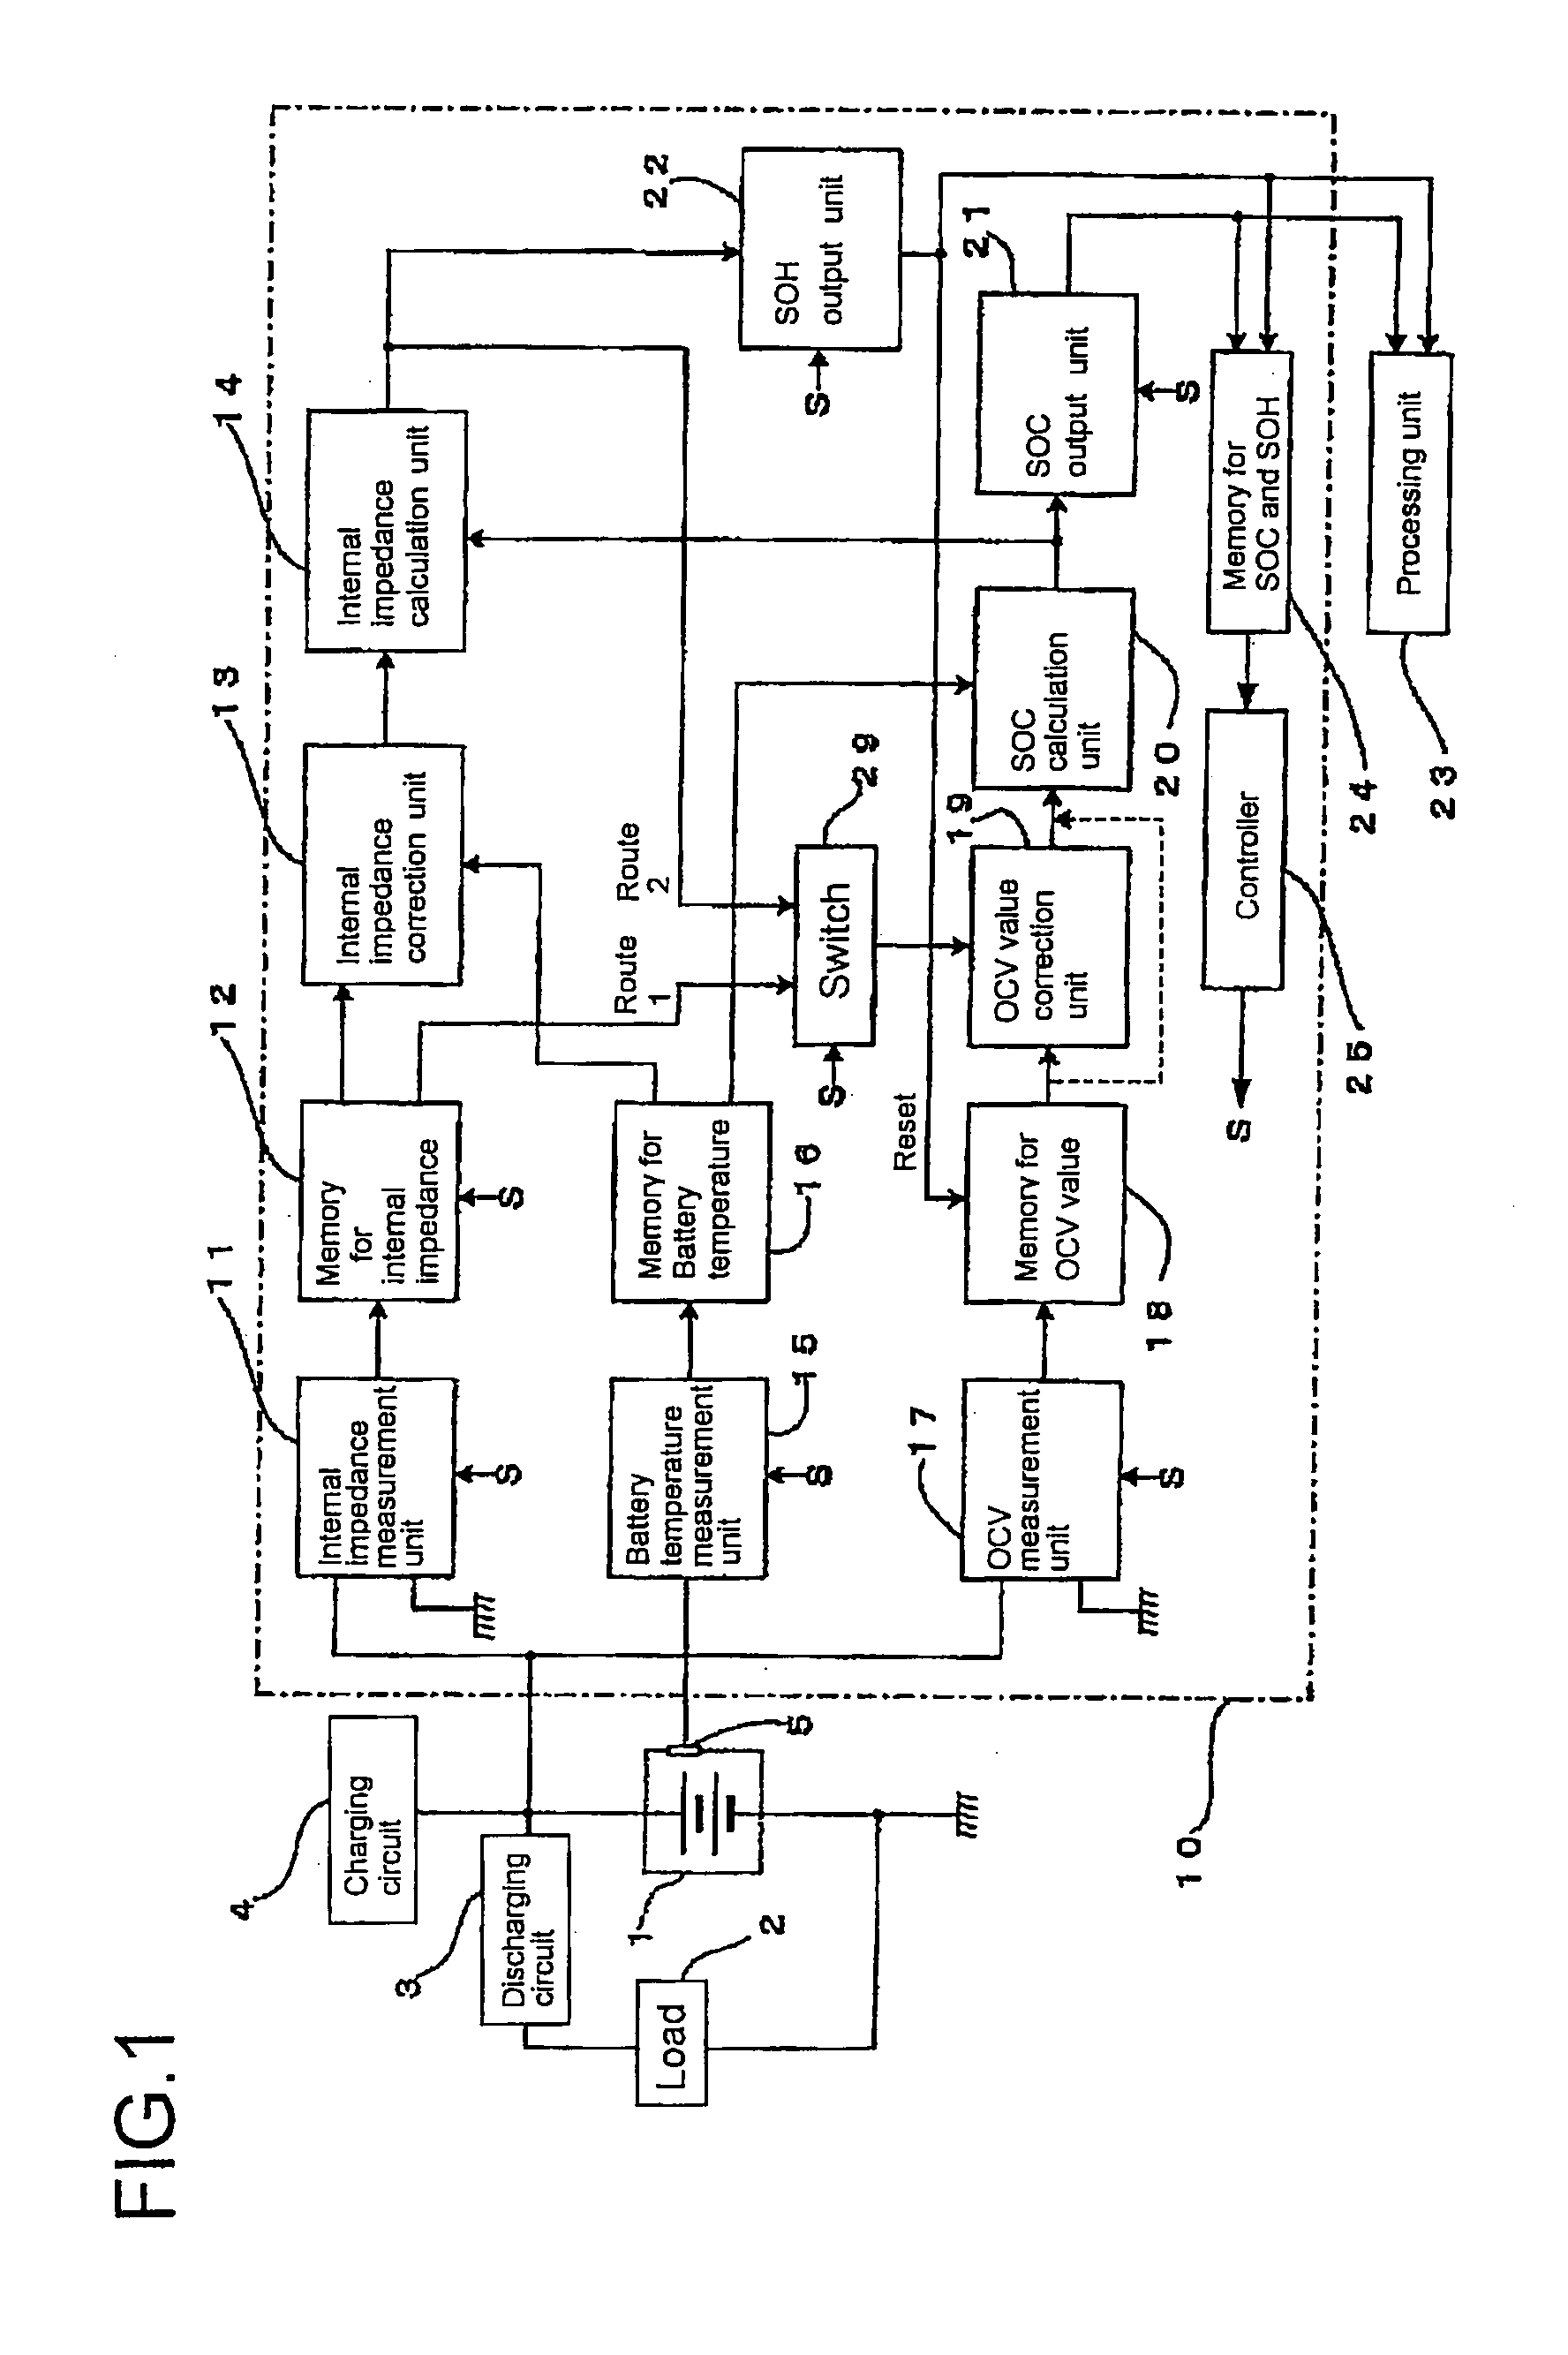 Method and apparatus for determining deterioration of secondary battery, and power supply system therewith